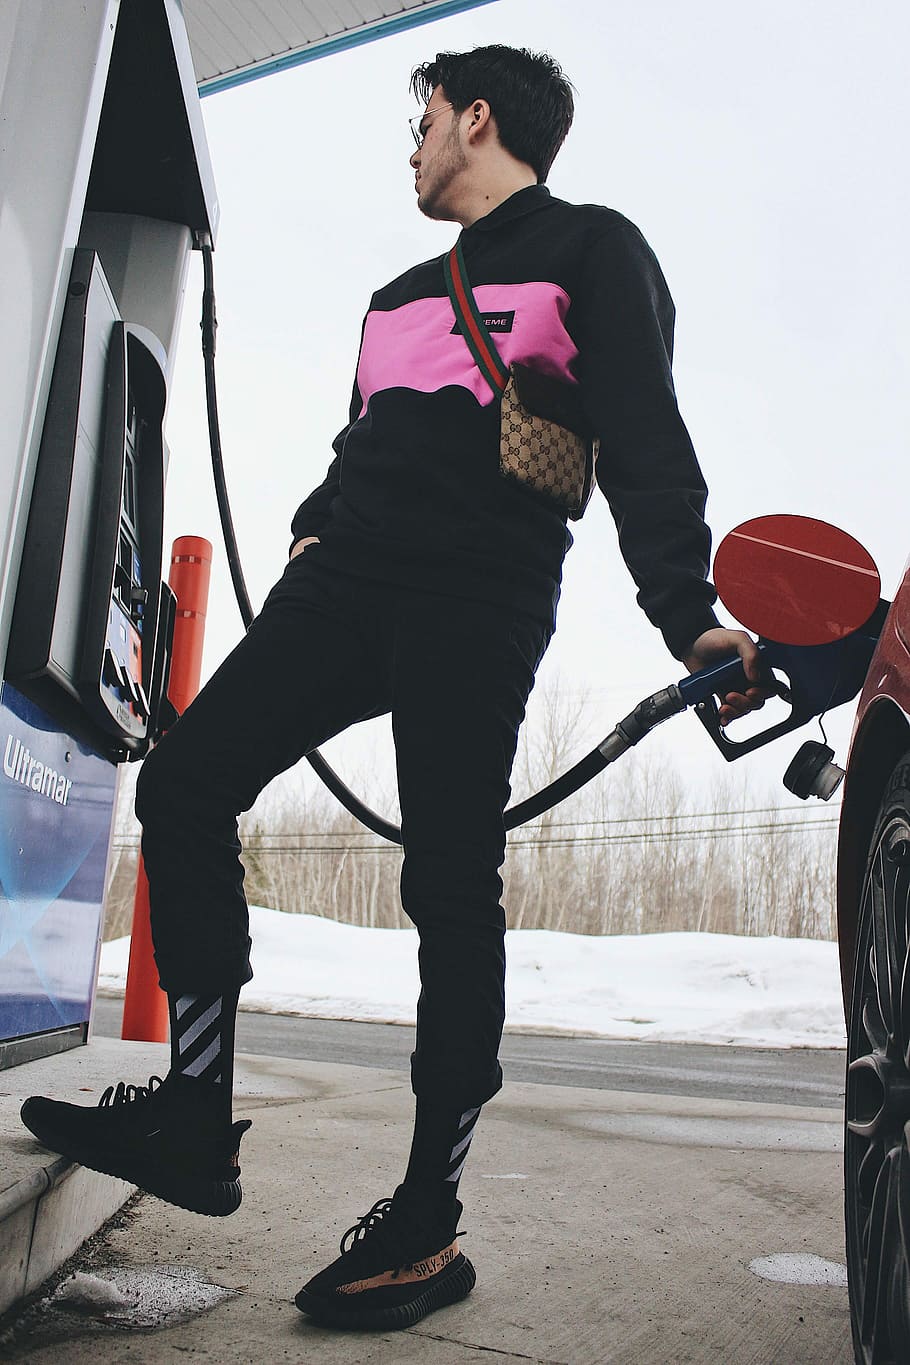 HD wallpaper: man refilling gas on red car on gas station, yeezy